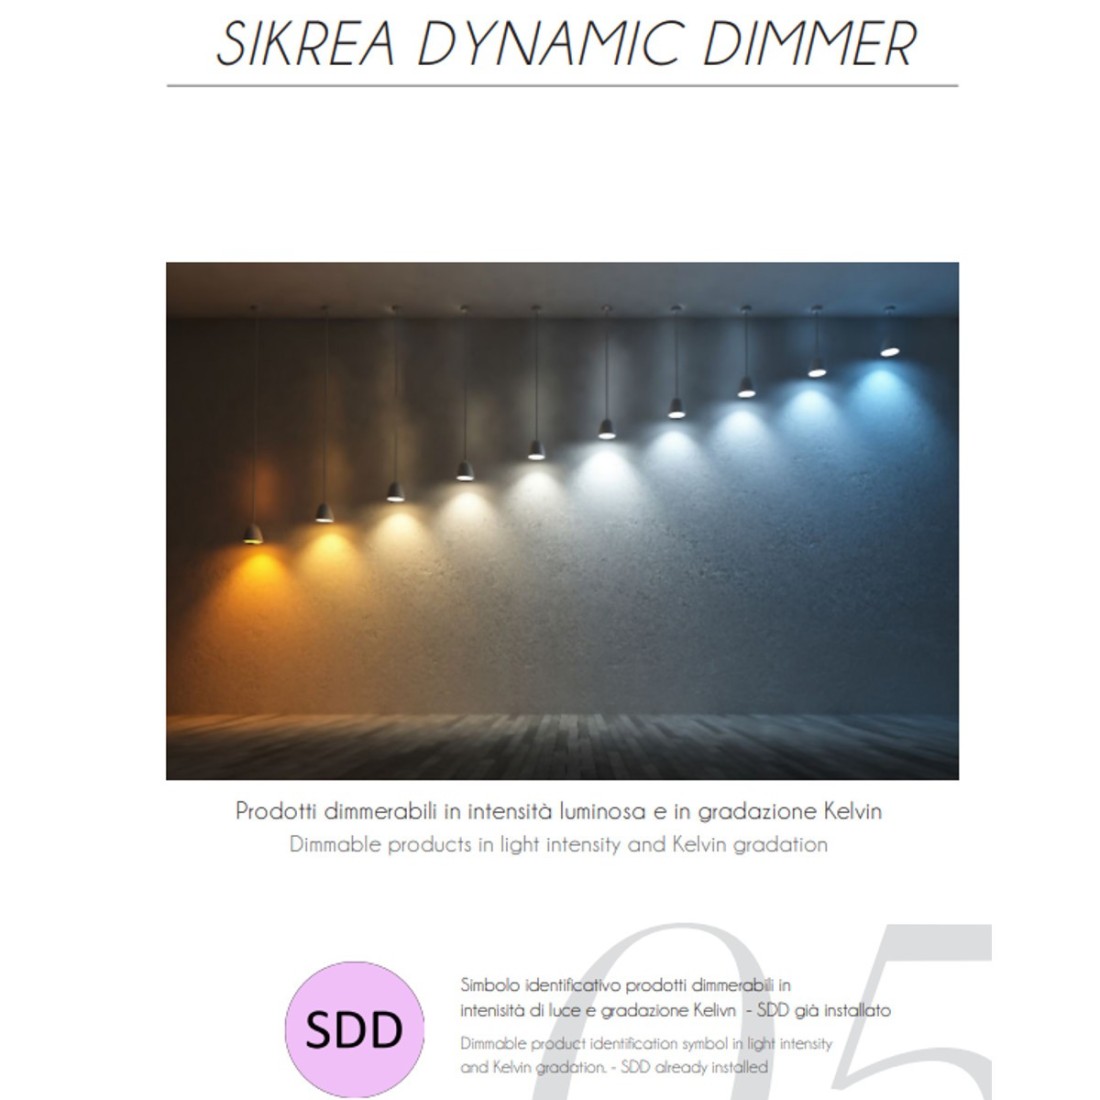 Applique led Sikrea Group OSLO AB 2499 dimmerabile